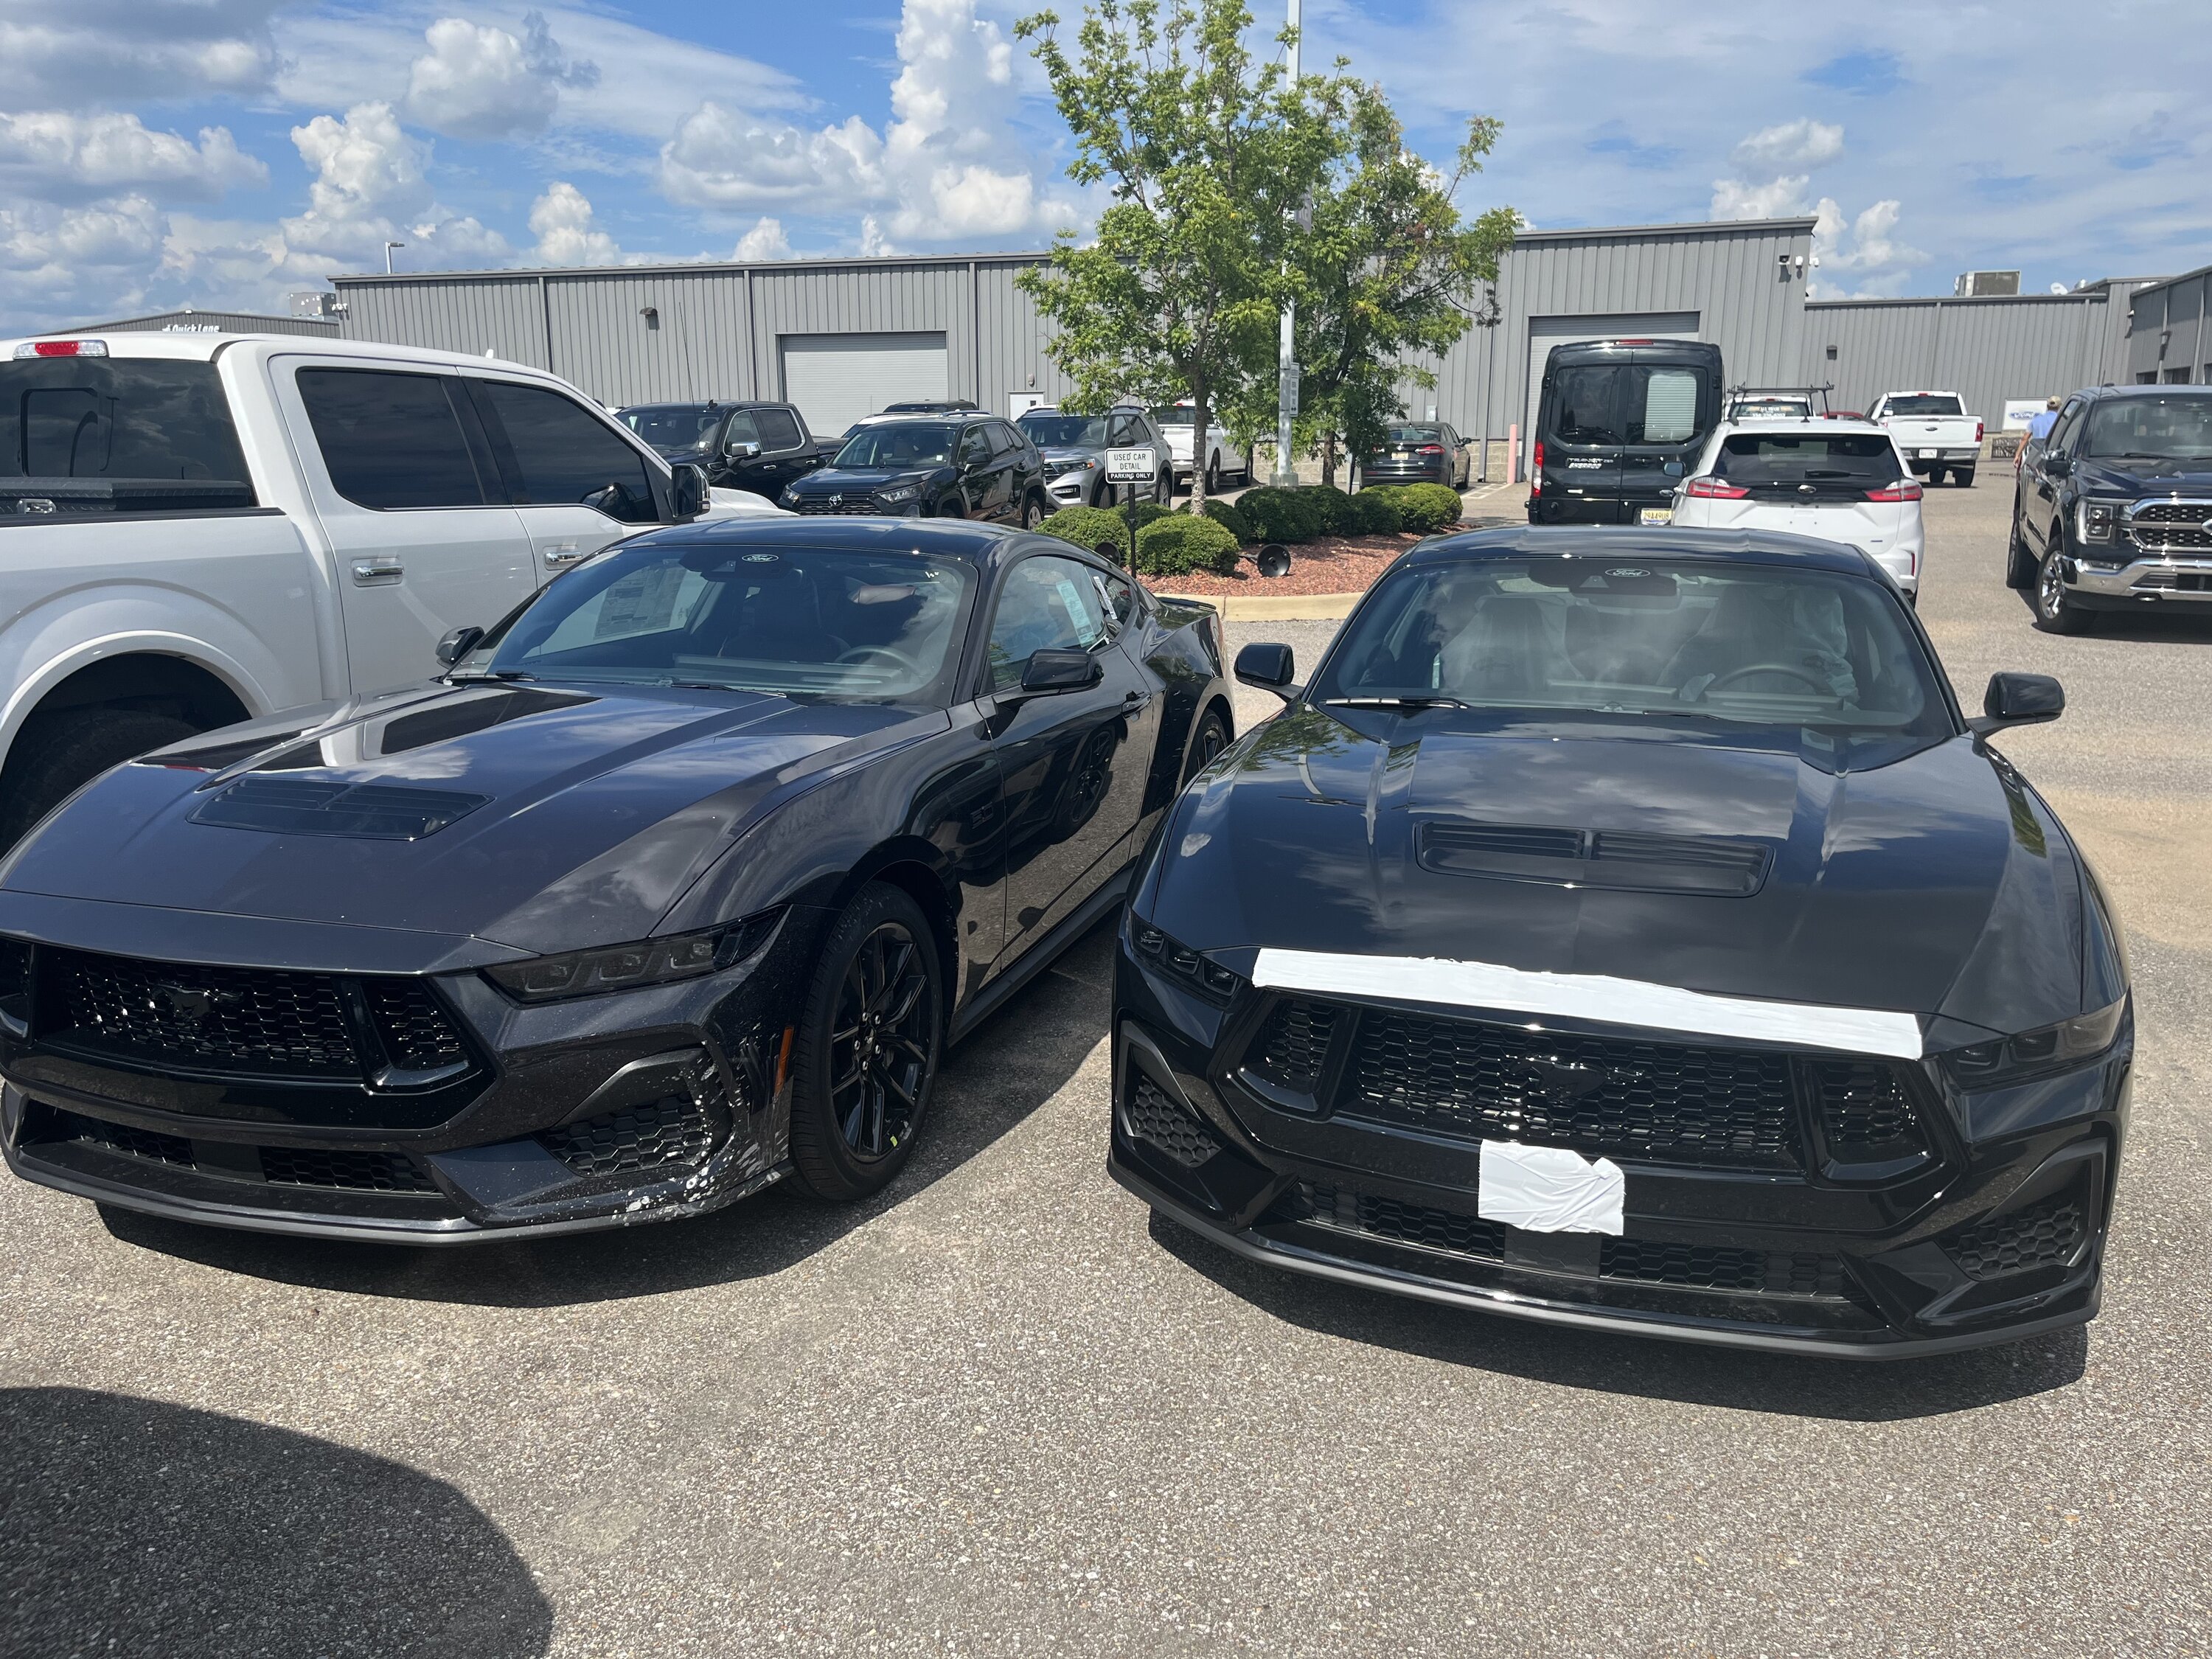 S650 Mustang Dealer just unexpectedly received 4 GTs!! IMG_7923